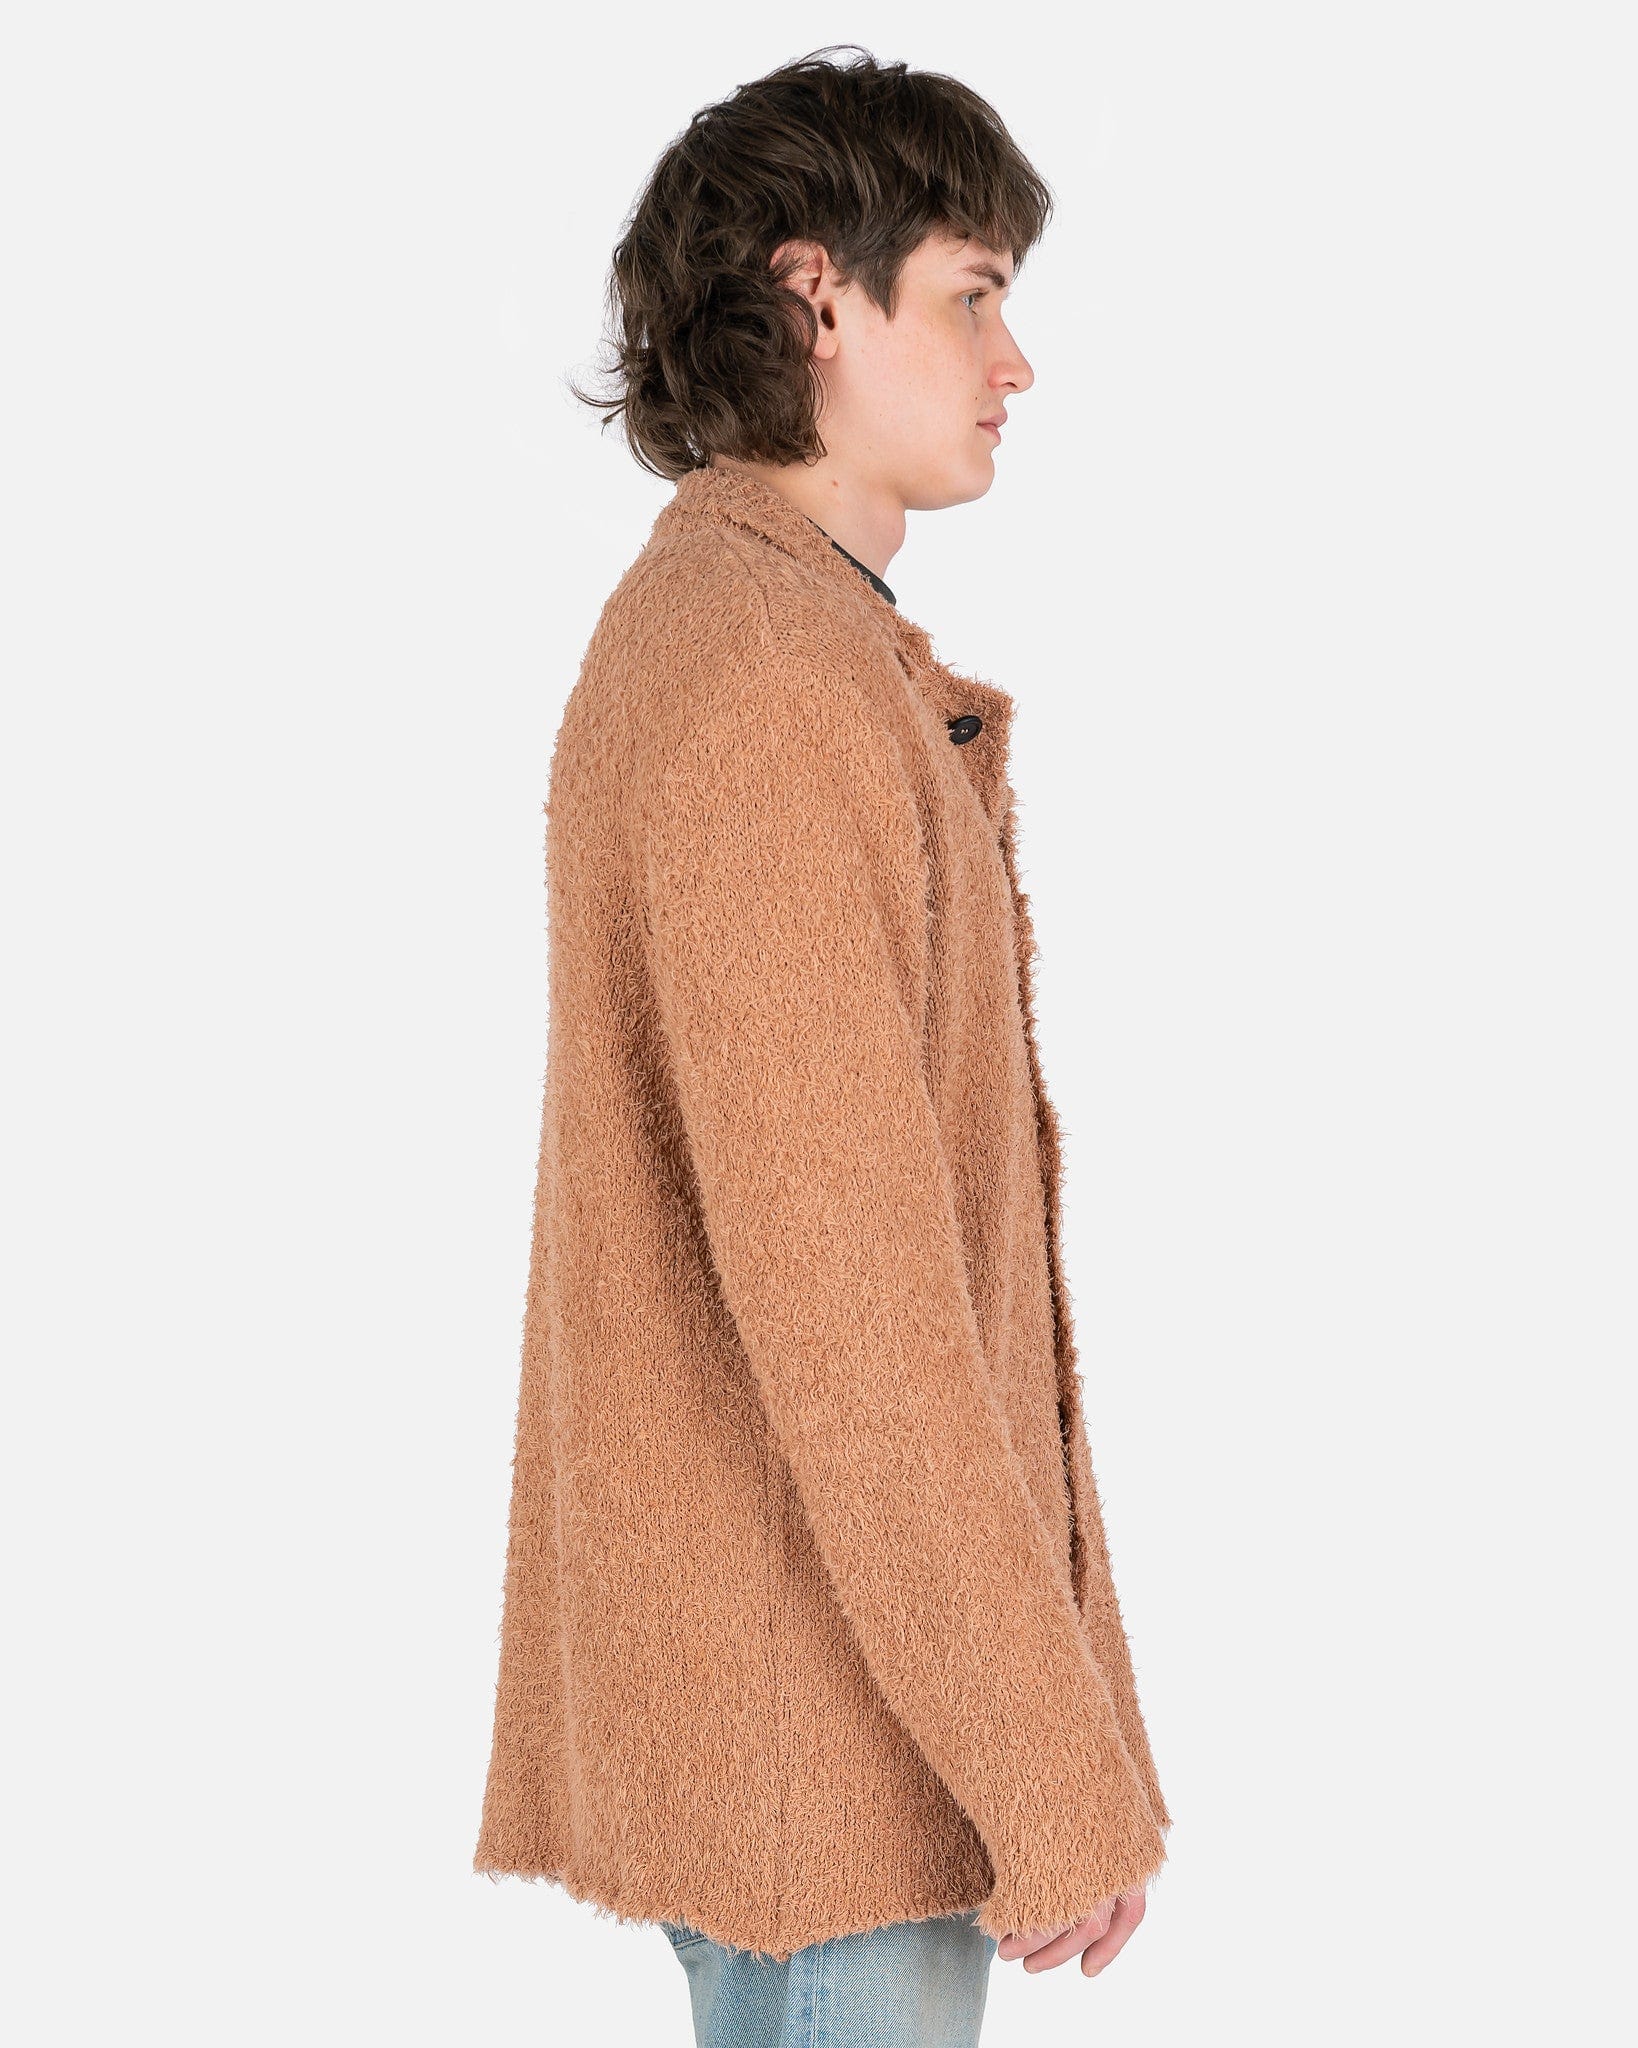 Our Legacy mens sweater Big Cardigan in Caramel